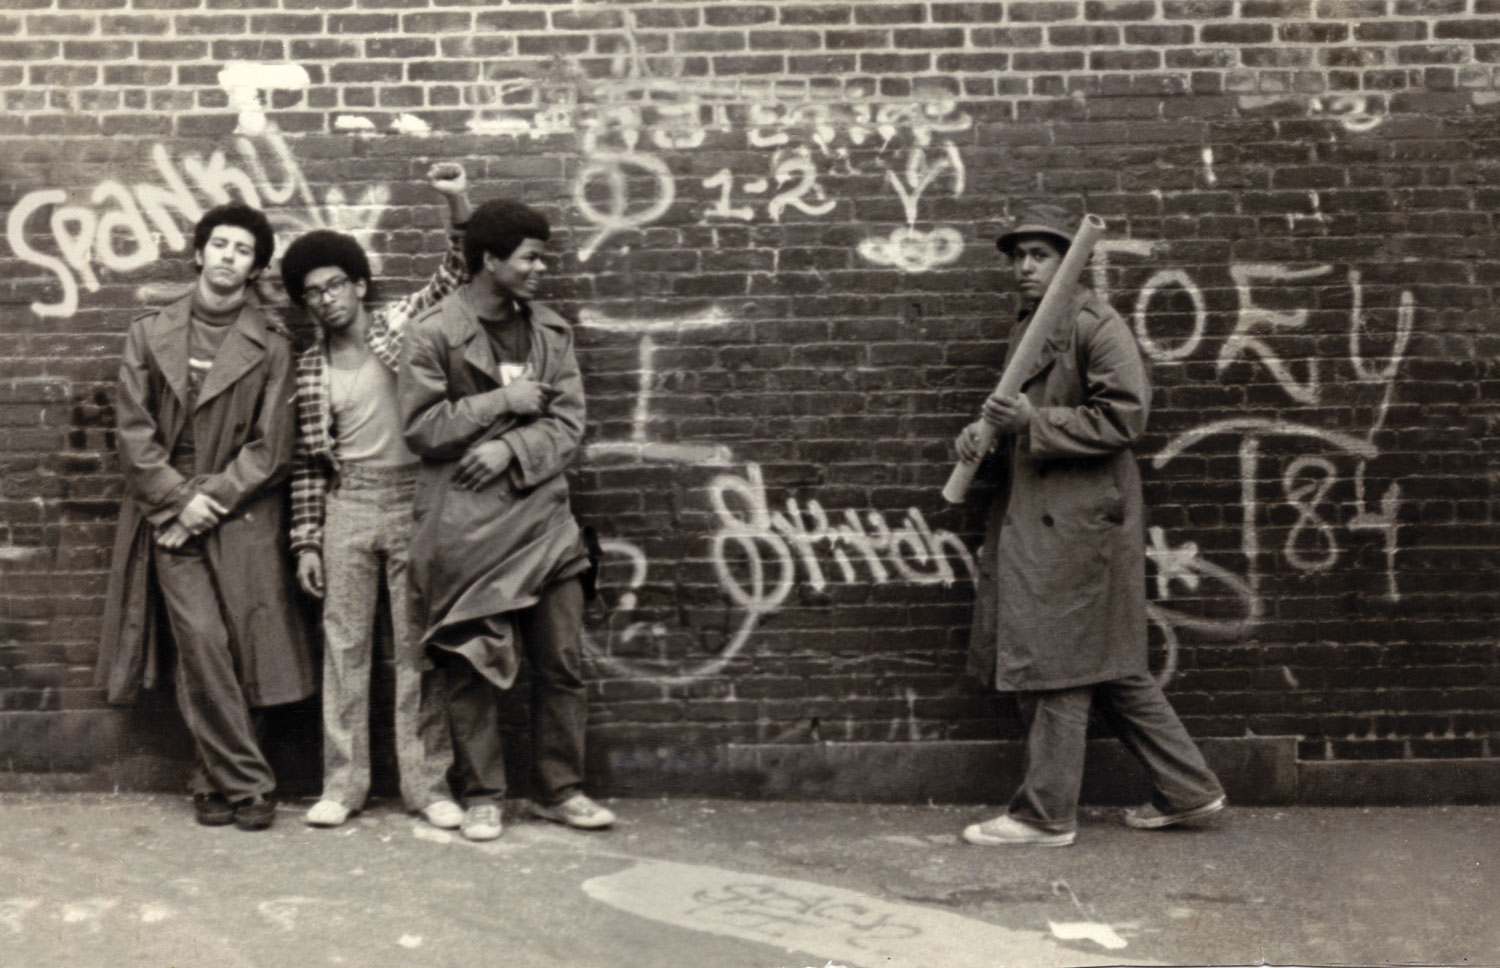 SNAKE 1, STATIC 5, FLASH 191, and STITCH 1 at the P.S. 189 school yard in Washington Heights,  New York. Circa 1973.